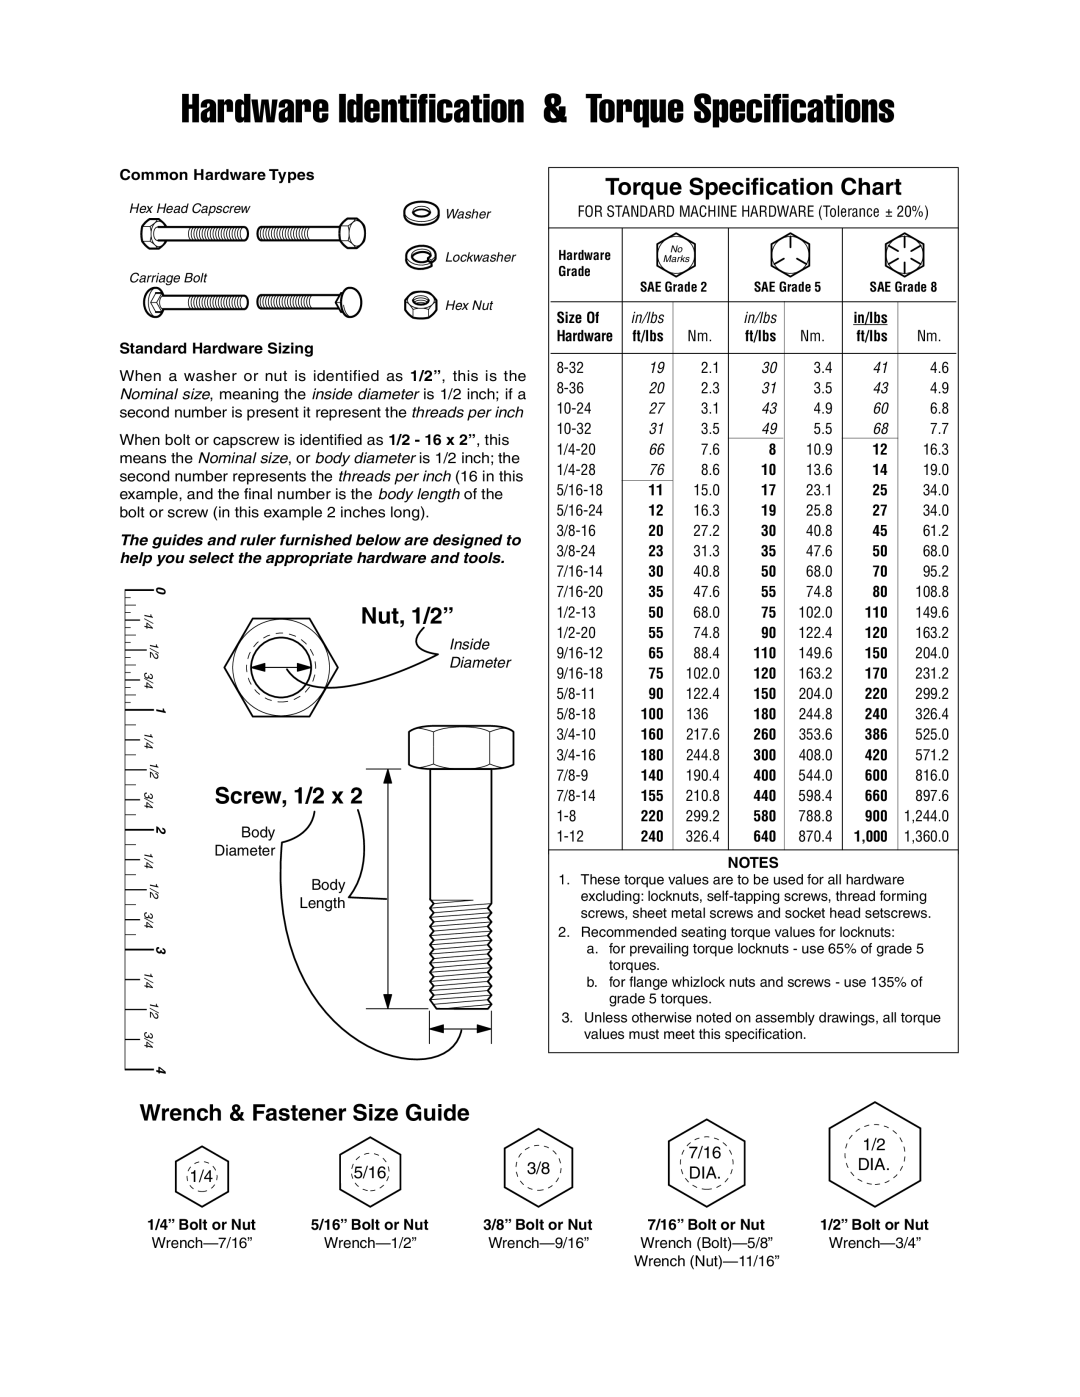 Snapper 4568 Wrench & Fastener Size Guide, Hardware Identification & Torque Specifications, Torque Specification Chart 